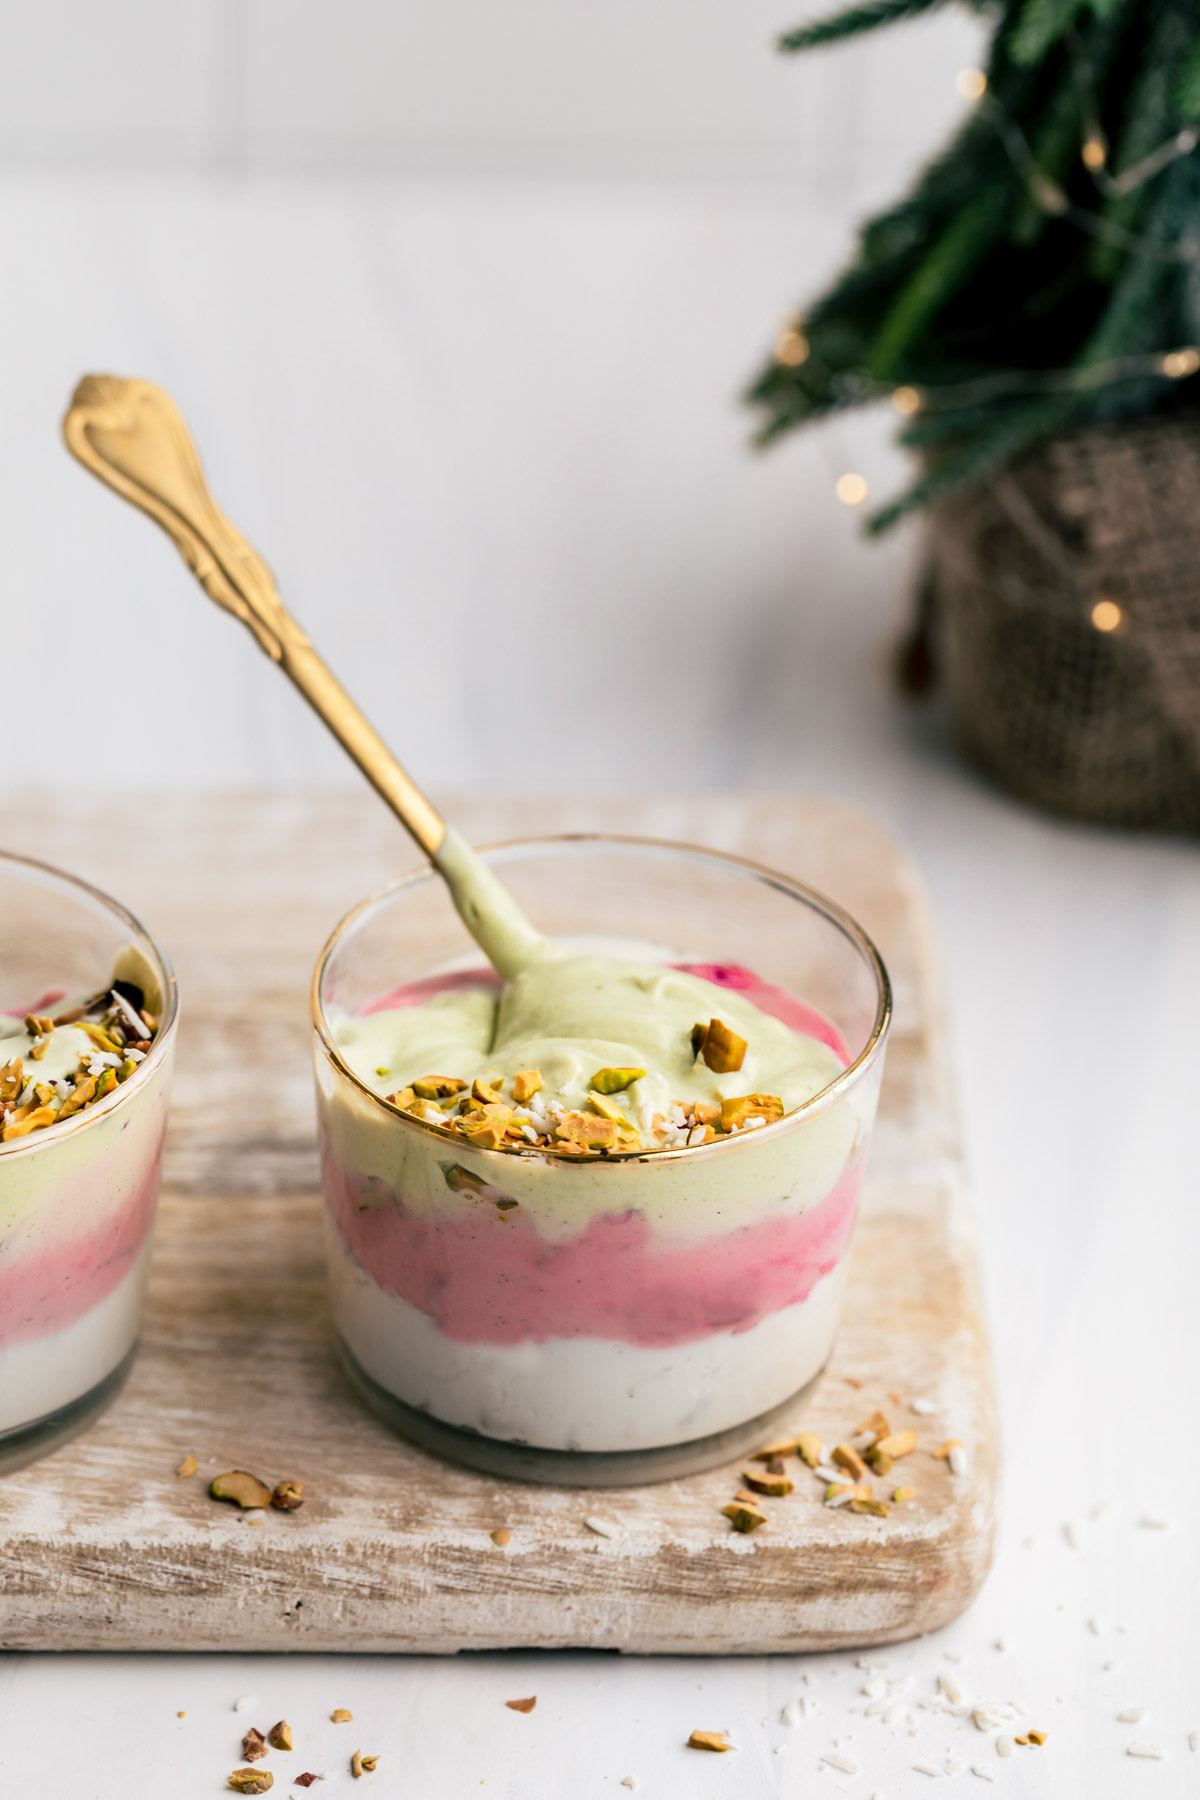 Christmas smoothie in small glass topped with chopped pistachio nuts with a gold teaspoon on a wooden cutting board